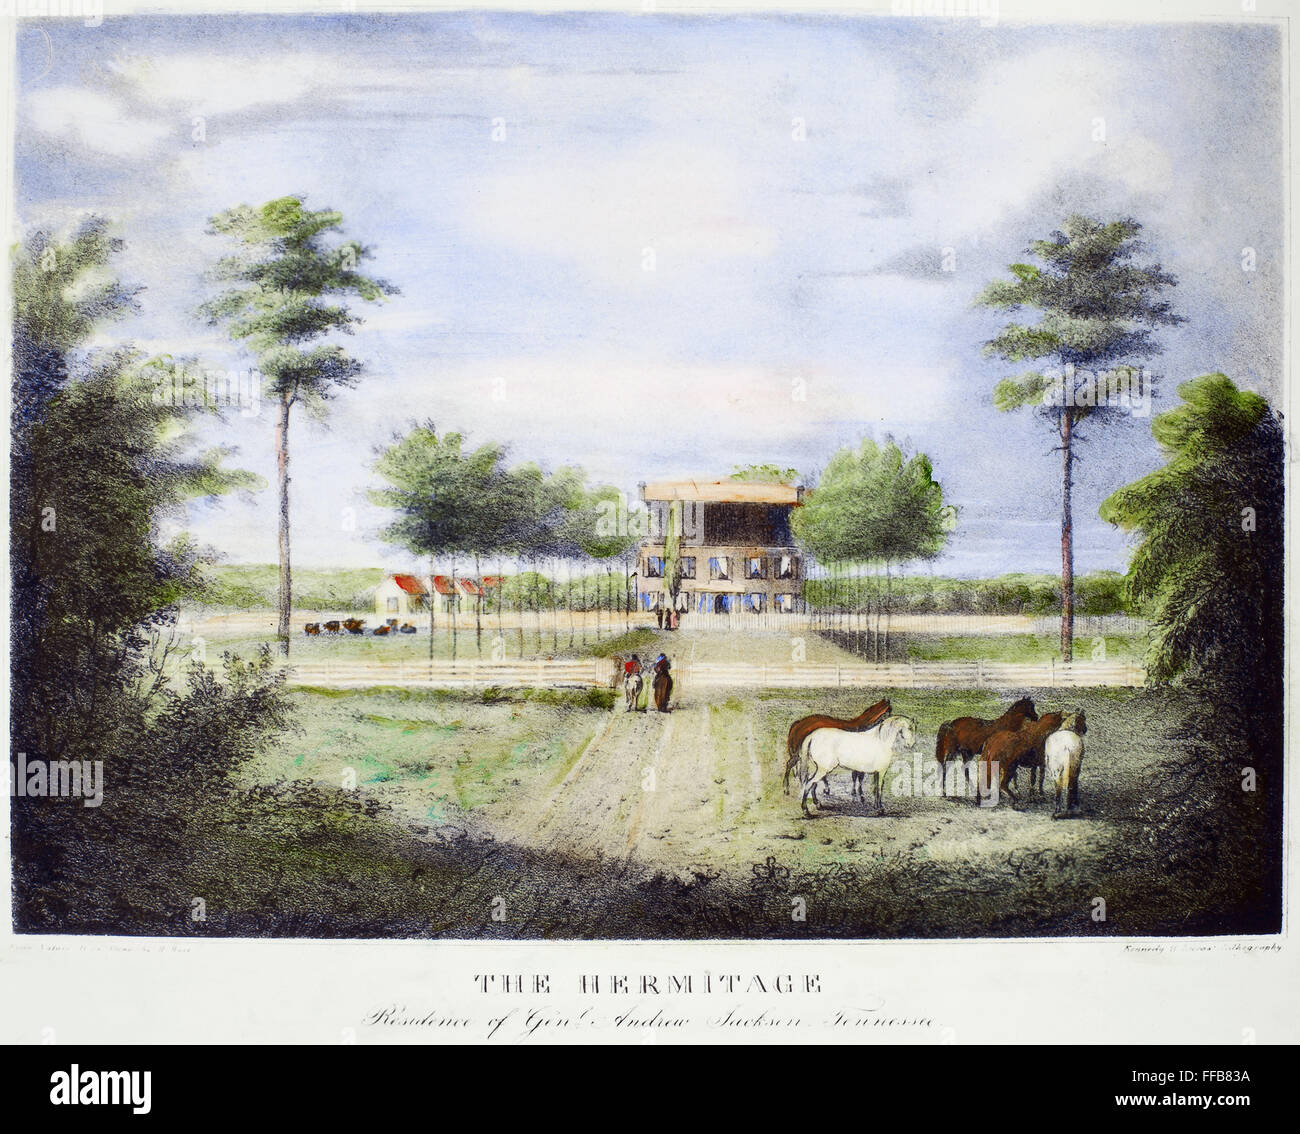 ANDREW JACKSON: HERMITAGE. /nAndrew Jackson's home, the Hermitage, near Nashville, Tennessee. Lithograph, c1830. Stock Photo